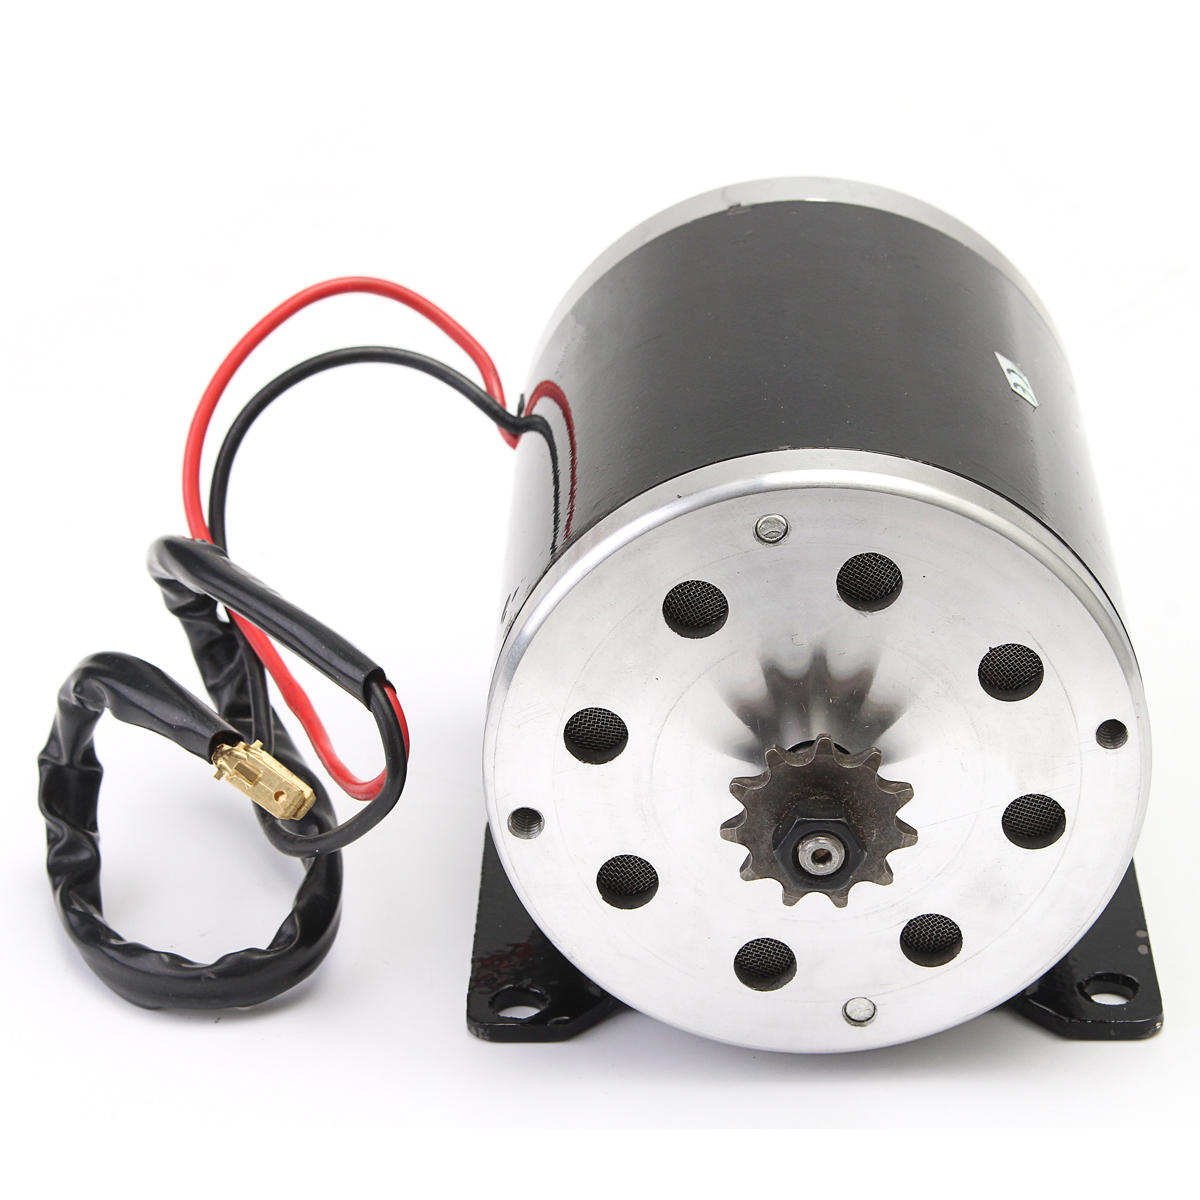 500w 24v Dc Electric Brush Zy1020 Motor For Scooter Ebike Go Kart Diy Project in sizing 1200 X 1200